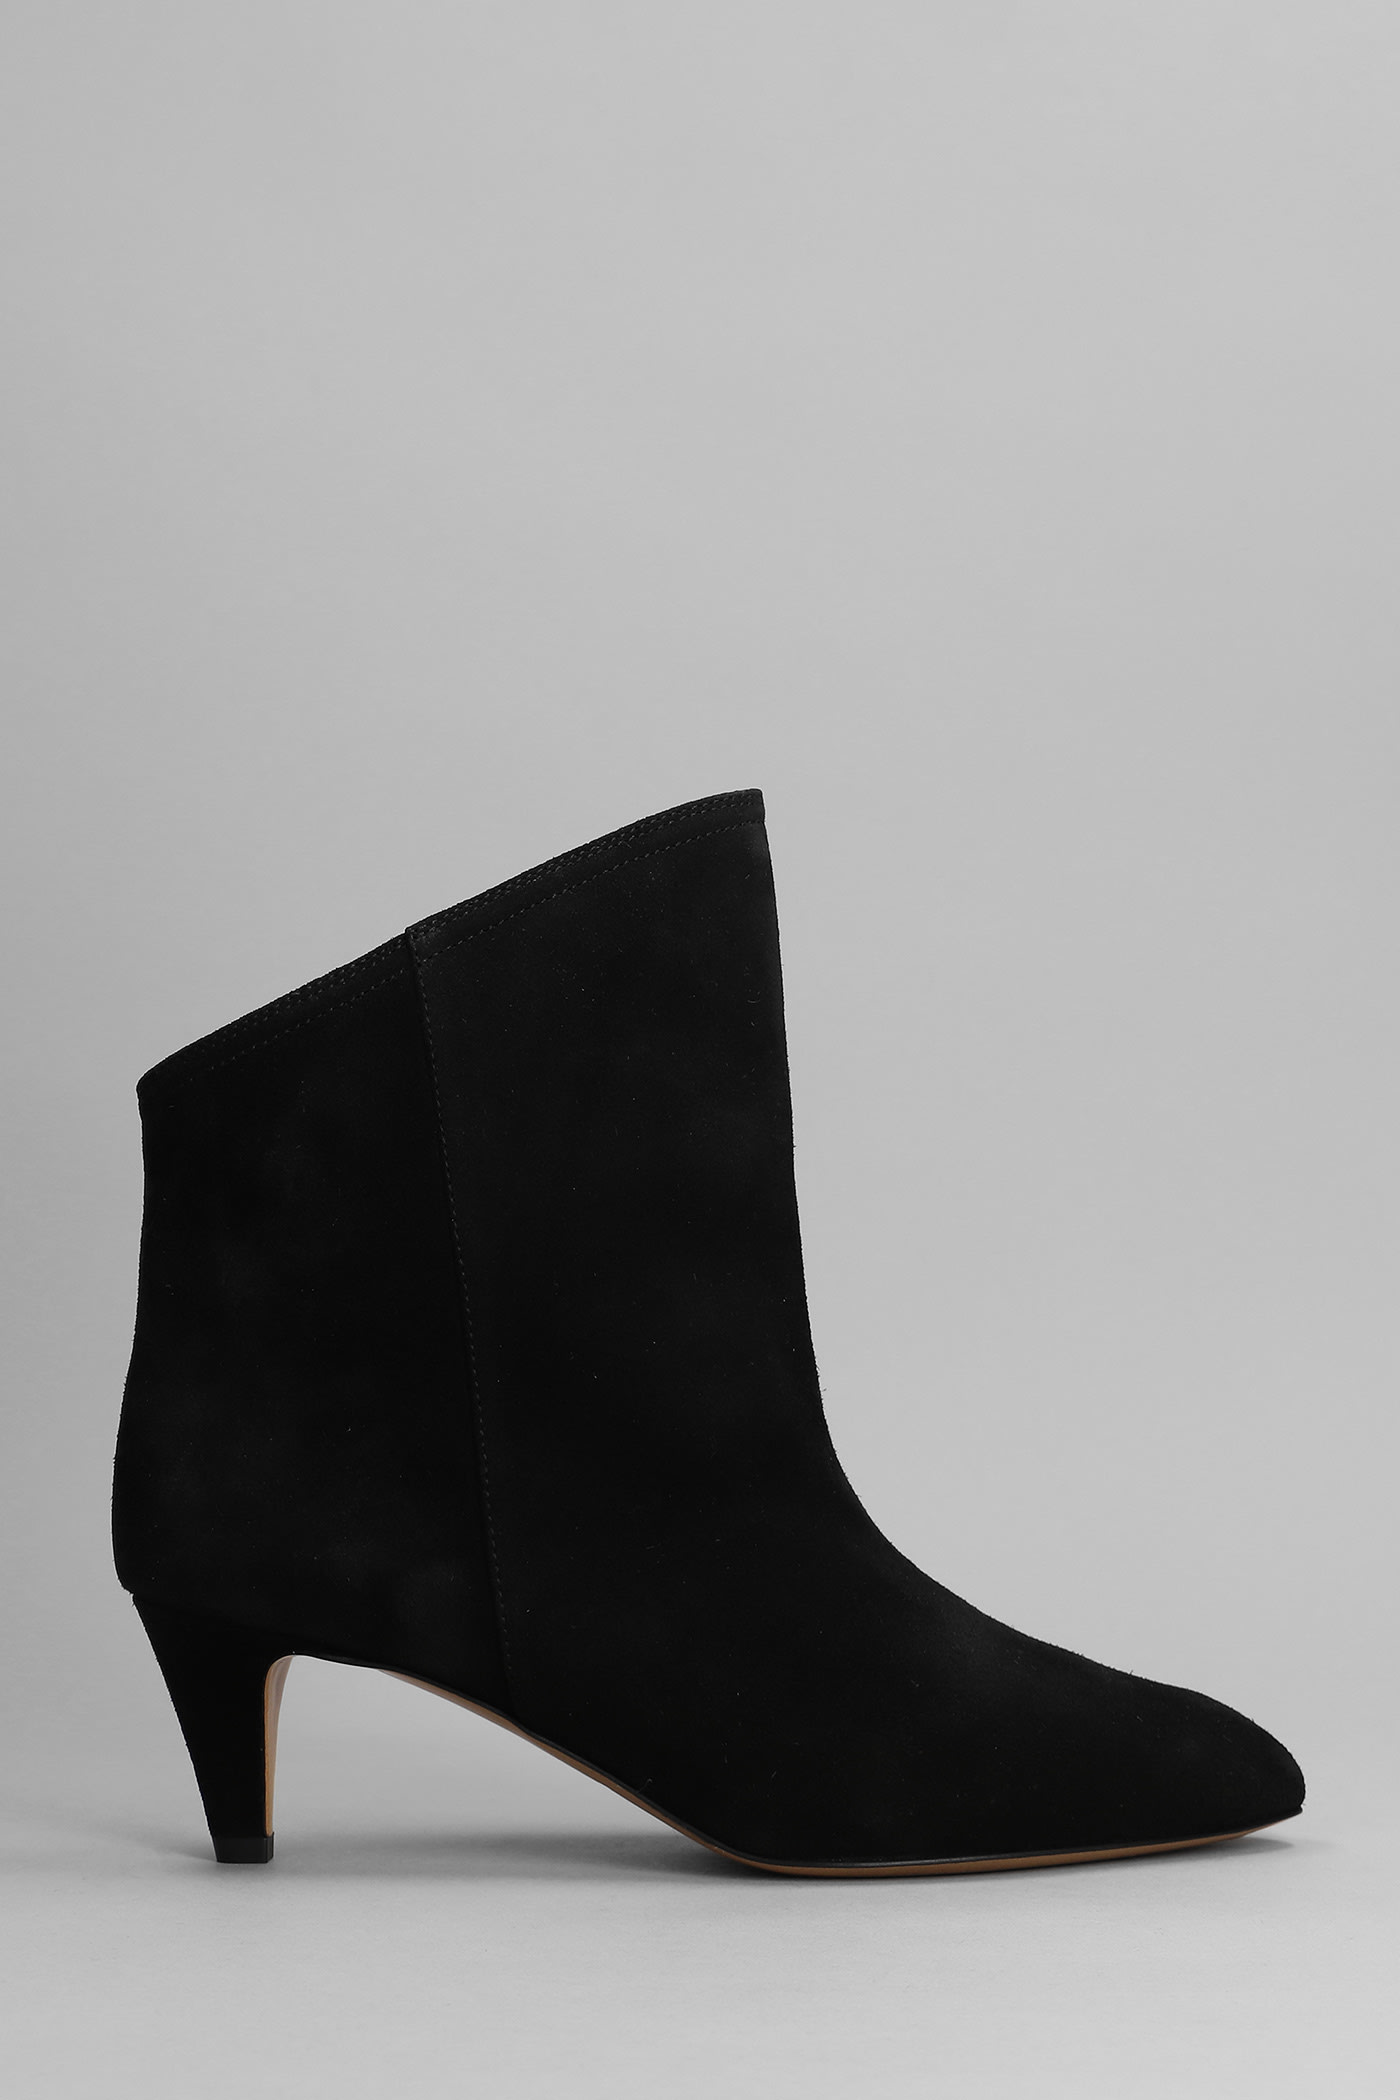 ISABEL MARANT DRIPI LOW HEELS ANKLE BOOTS IN BLACK SUEDE